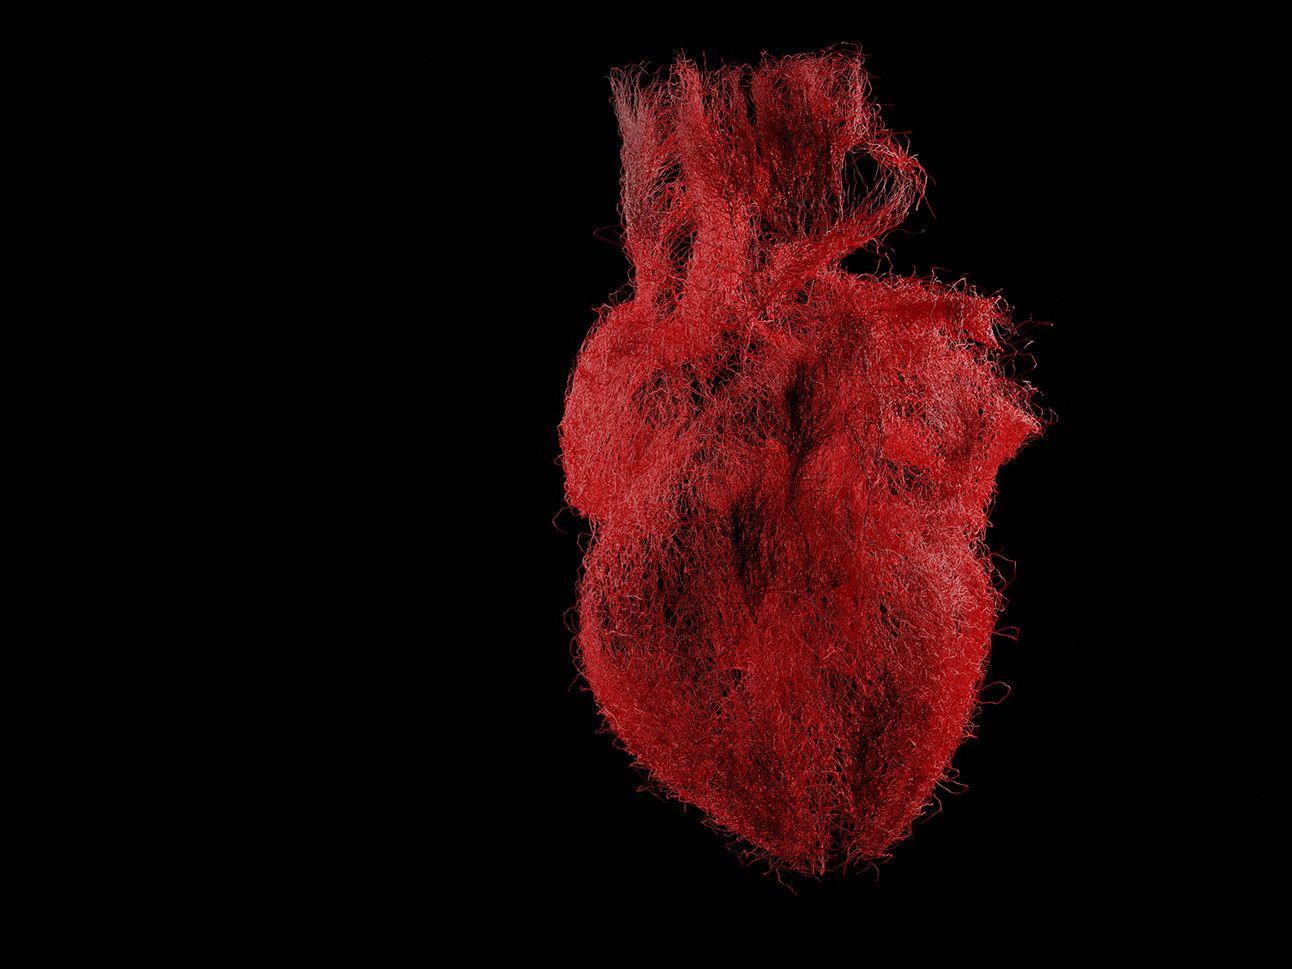 A still of a moving graphic depicting a human heart.